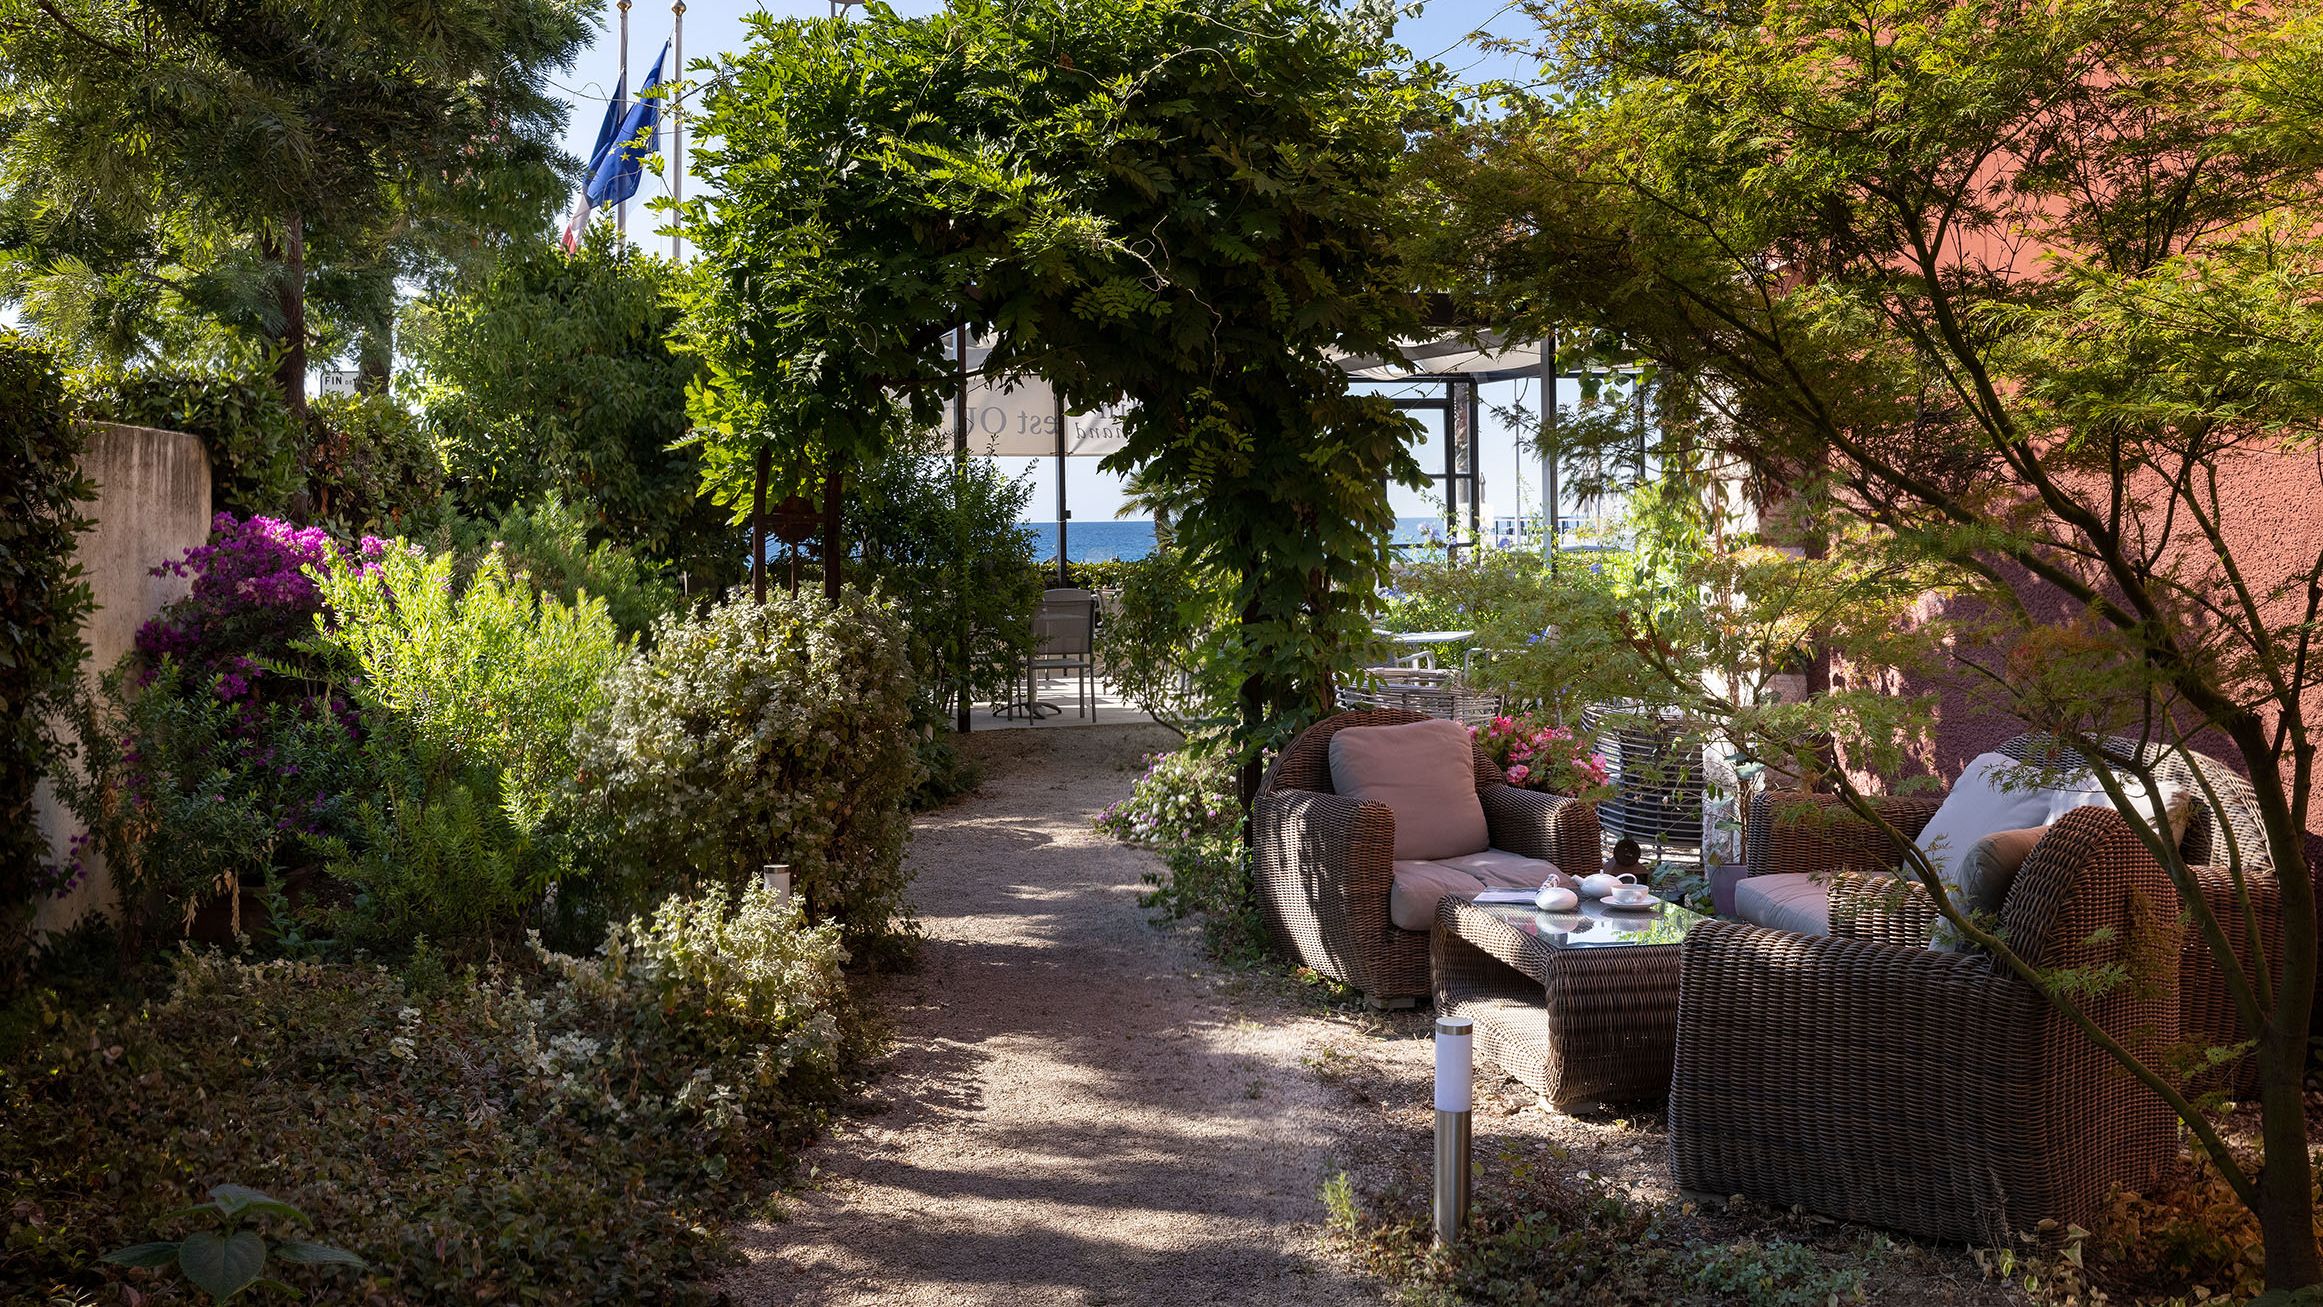 Le Jardin Gourmand in Cagnes-sur-Mer - Restaurant Reviews, Menu and